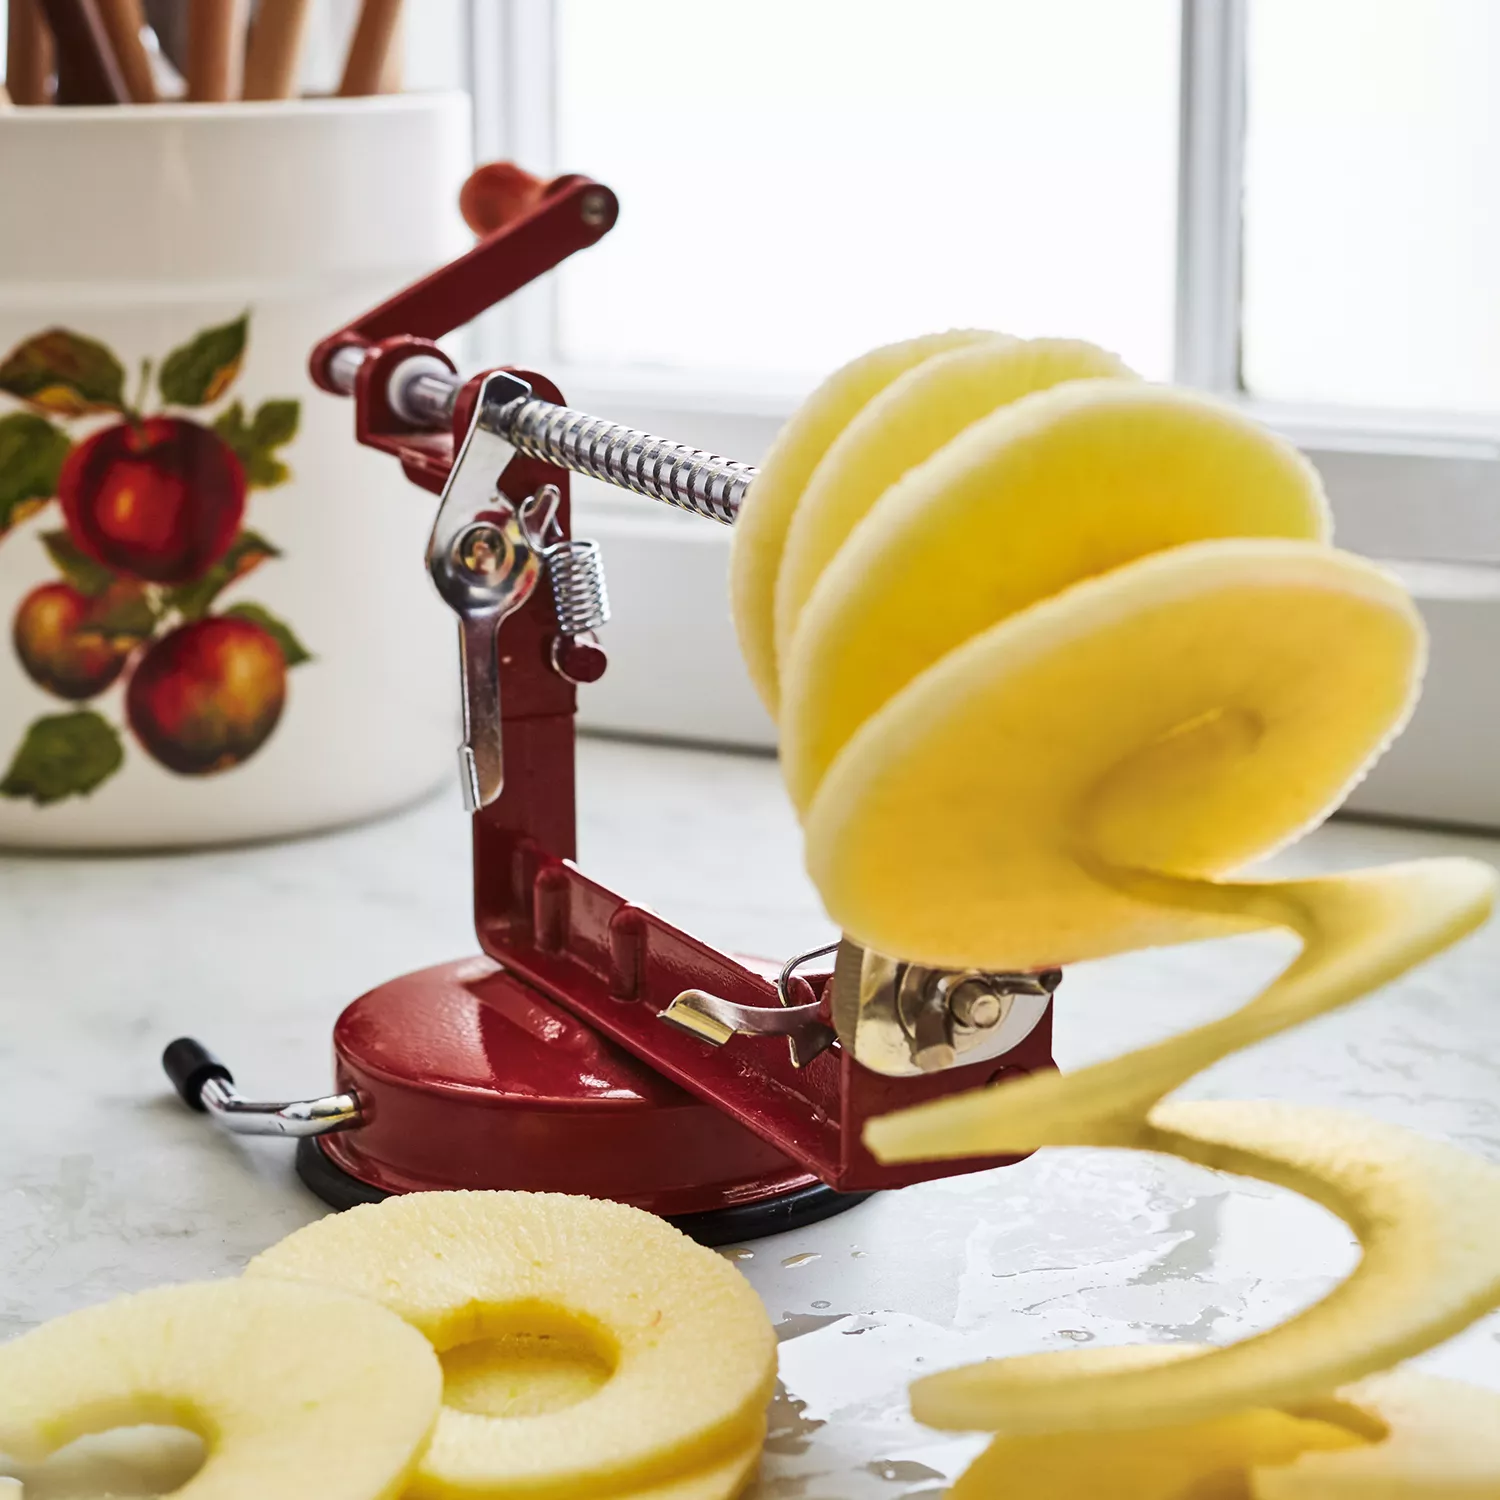 THE PAMPERED CHEF APPLE PEELER CORER SLICER WITH WOOD STAND